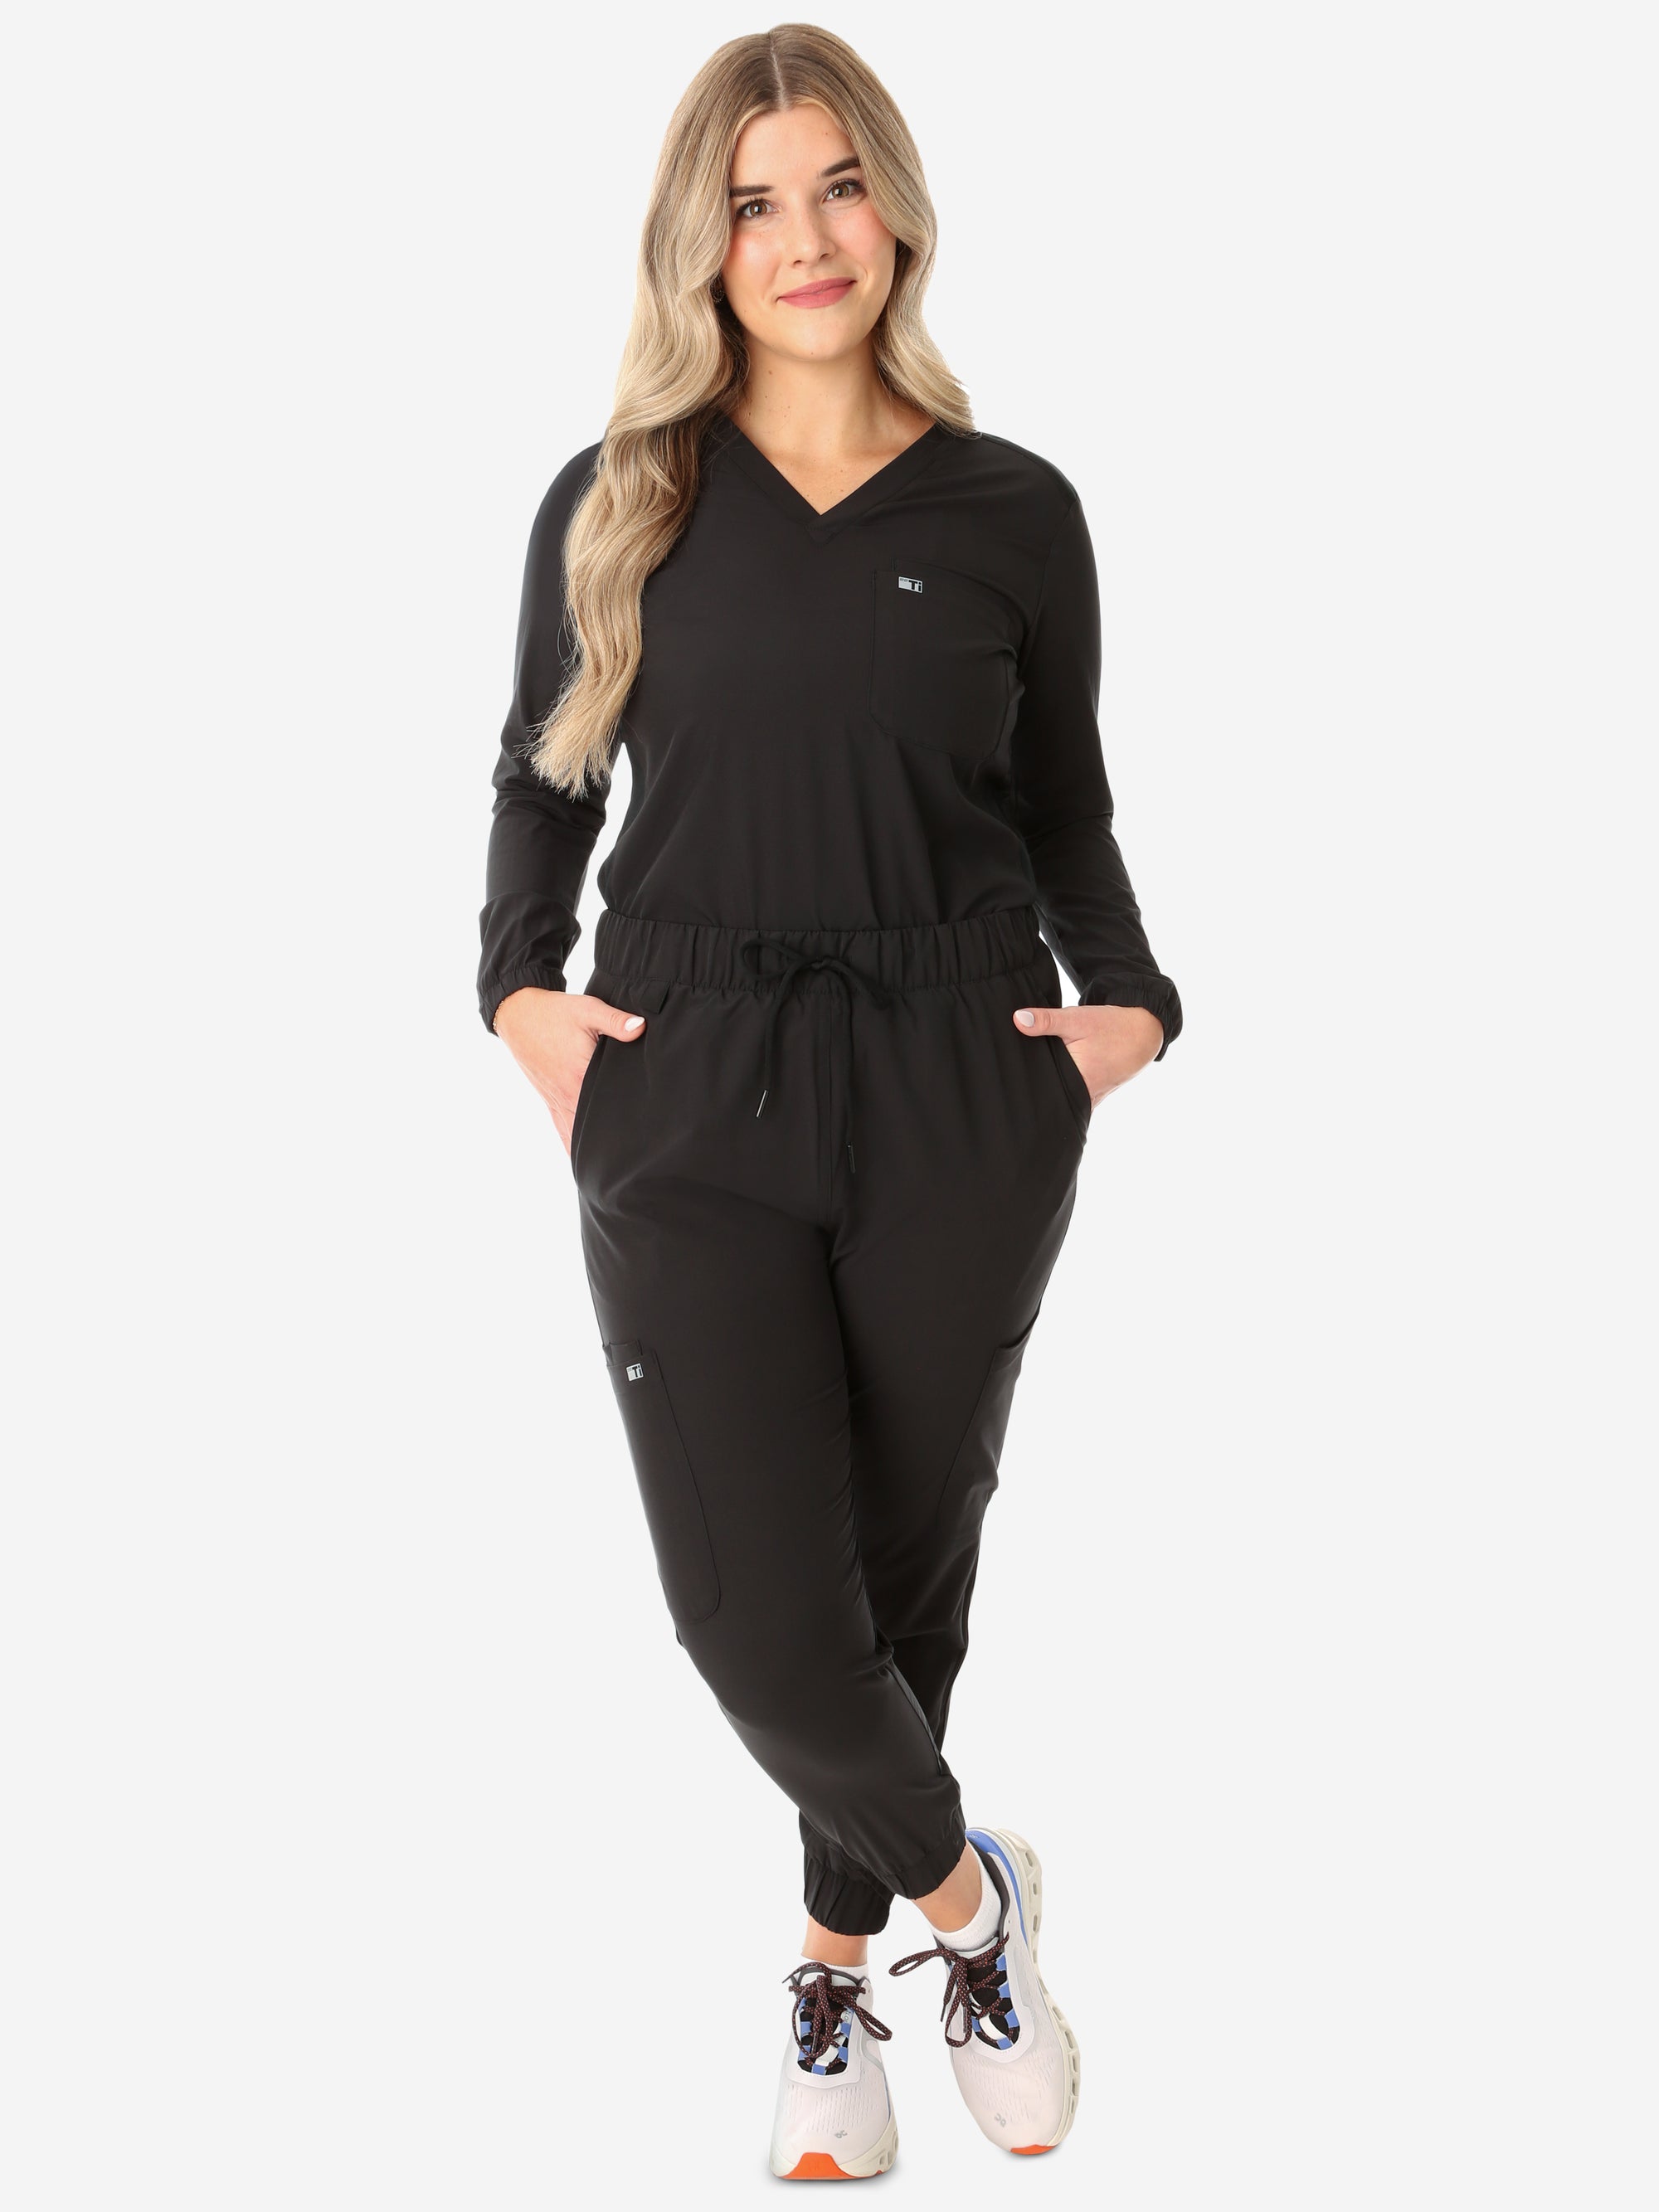 Women's Real Black Long-Sleeve Scrub Top Tucked with Perfect JoggersFront View Full Body